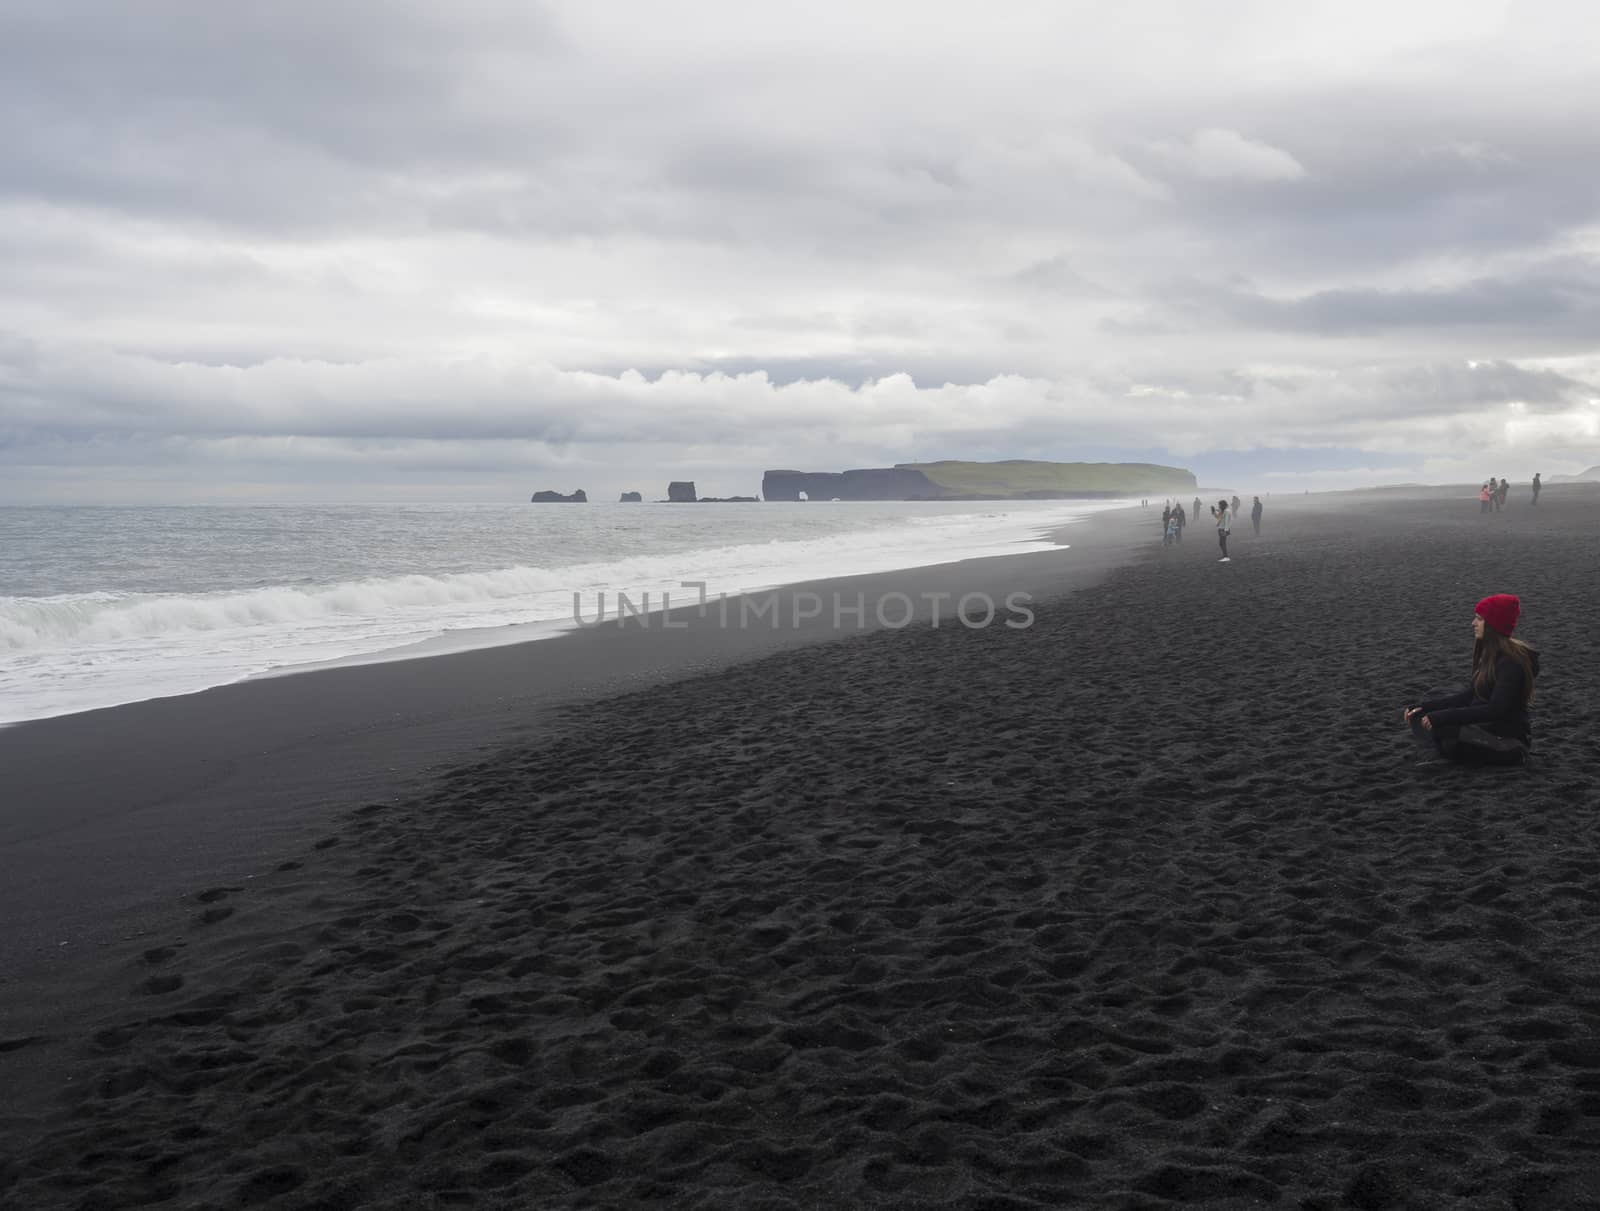 South Iceland, Vik i Myrdal, July 4, 2018: Young pretty woman in red hat sitting meditating or relaxing on Reynisfjara black sand beach, Dyrholaey rock and group of tourist people in backgrund, fog and moody sky, monochromatic look by Henkeova